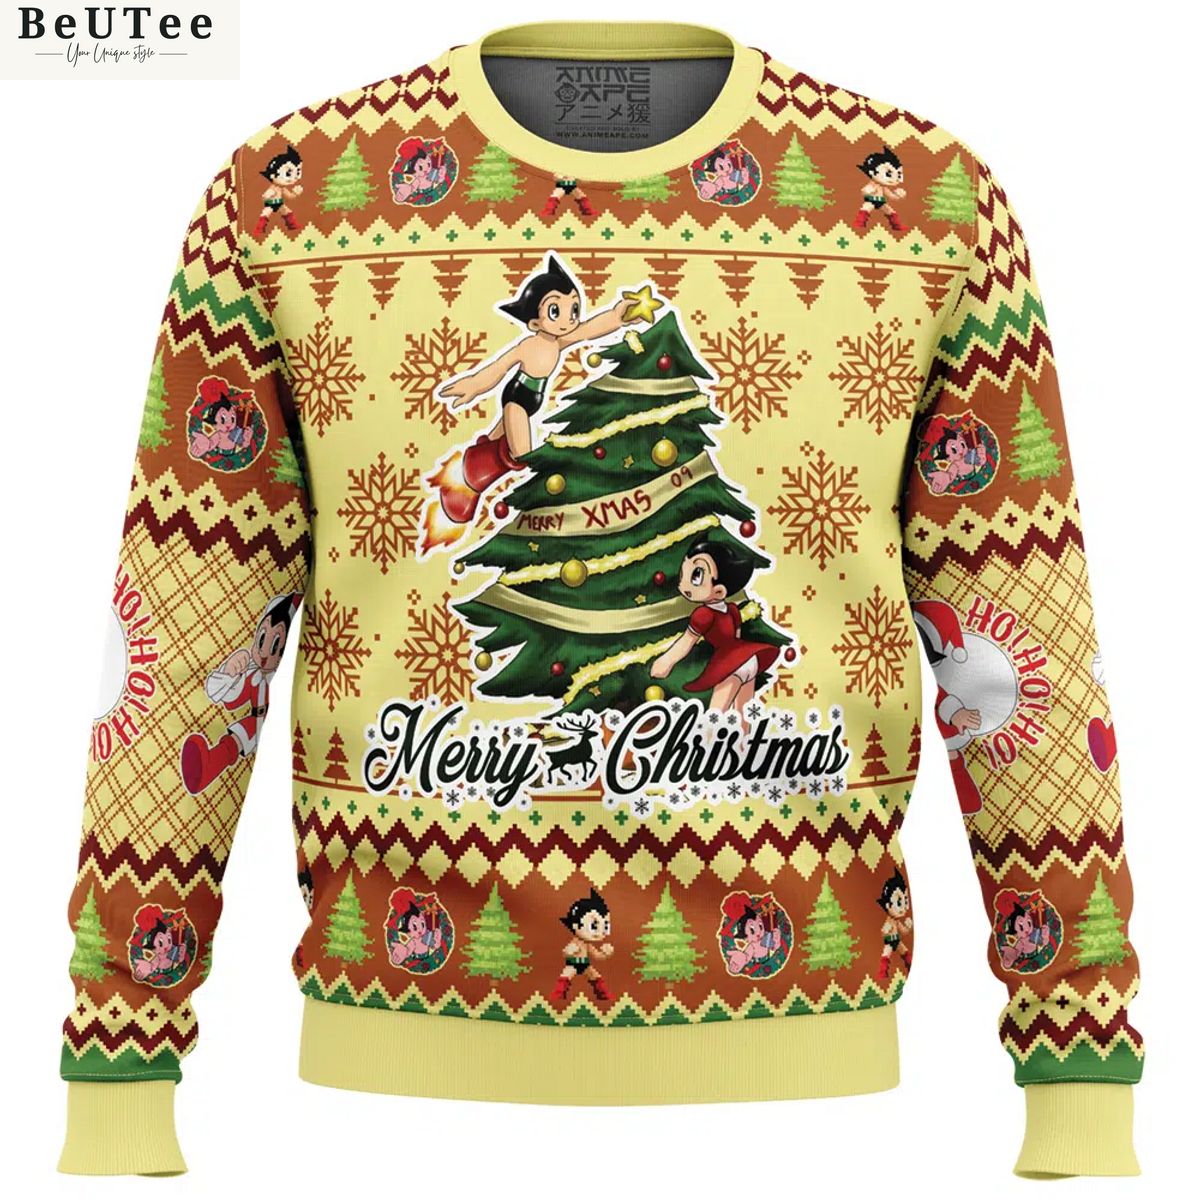 Merry Christmas Astroboy Ugly Christmas Sweater Jumper Great, I liked it